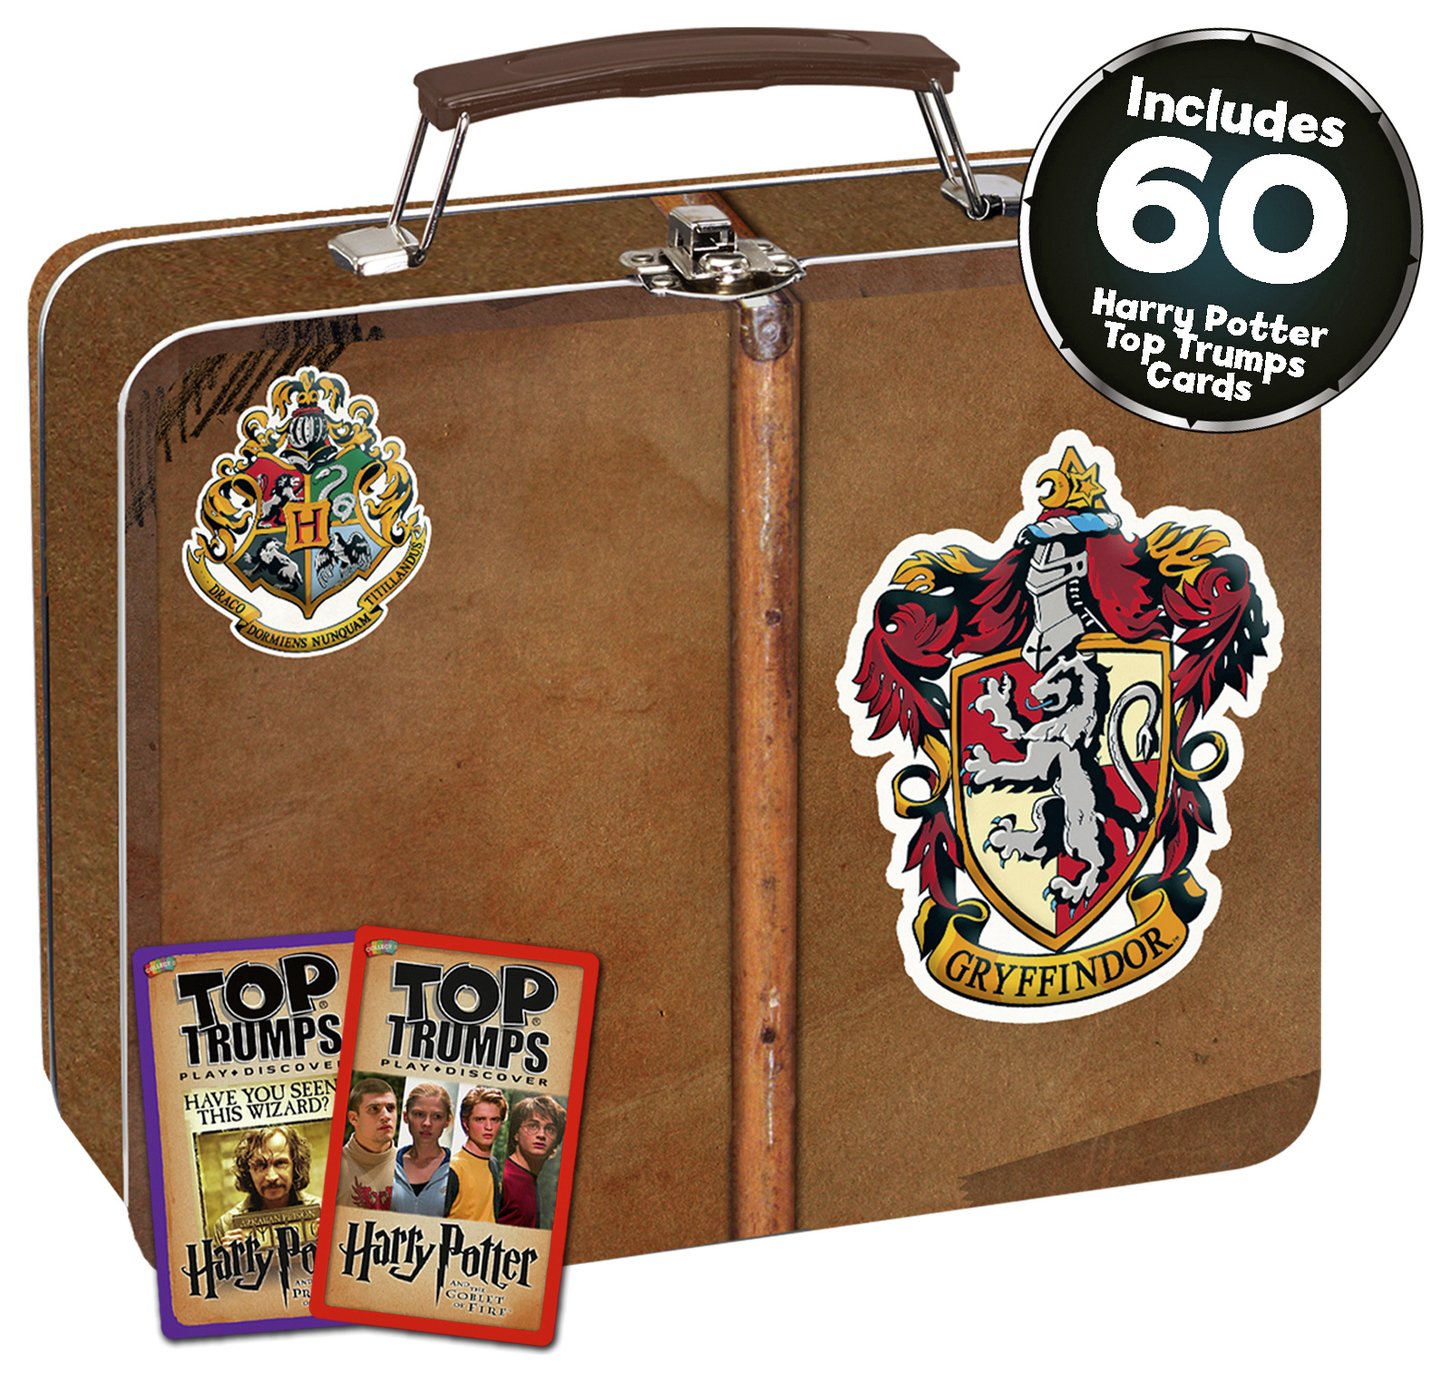 Harry Potter Gryffindor Top Trumps Collectors Tin Card Game Review